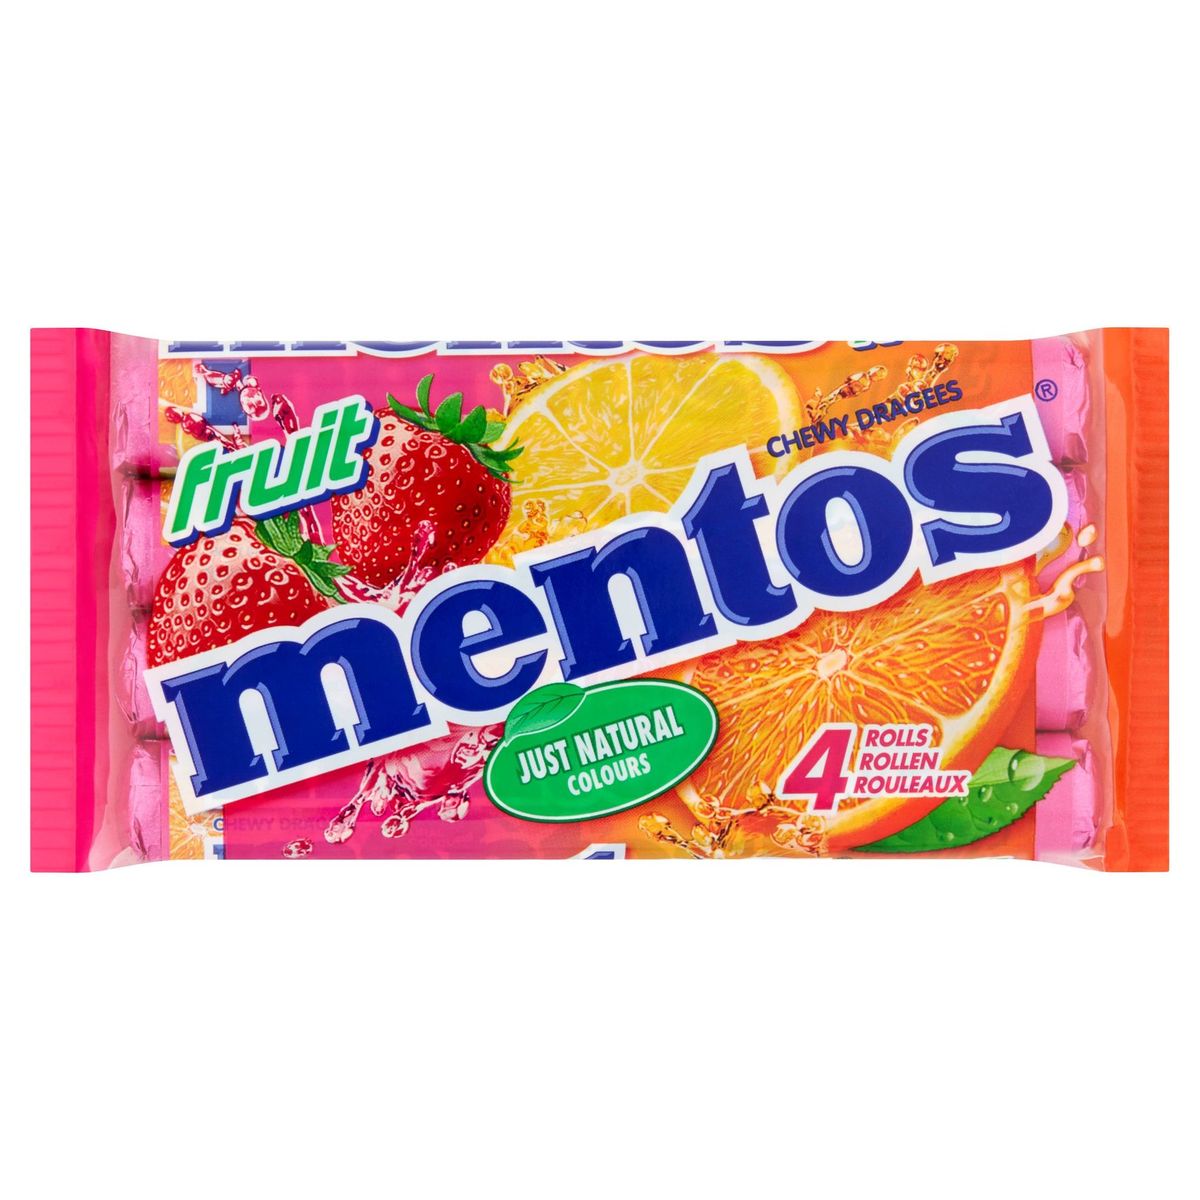 Mentos Chewy Dragees Fruit Rollen 4 x 37.5 g